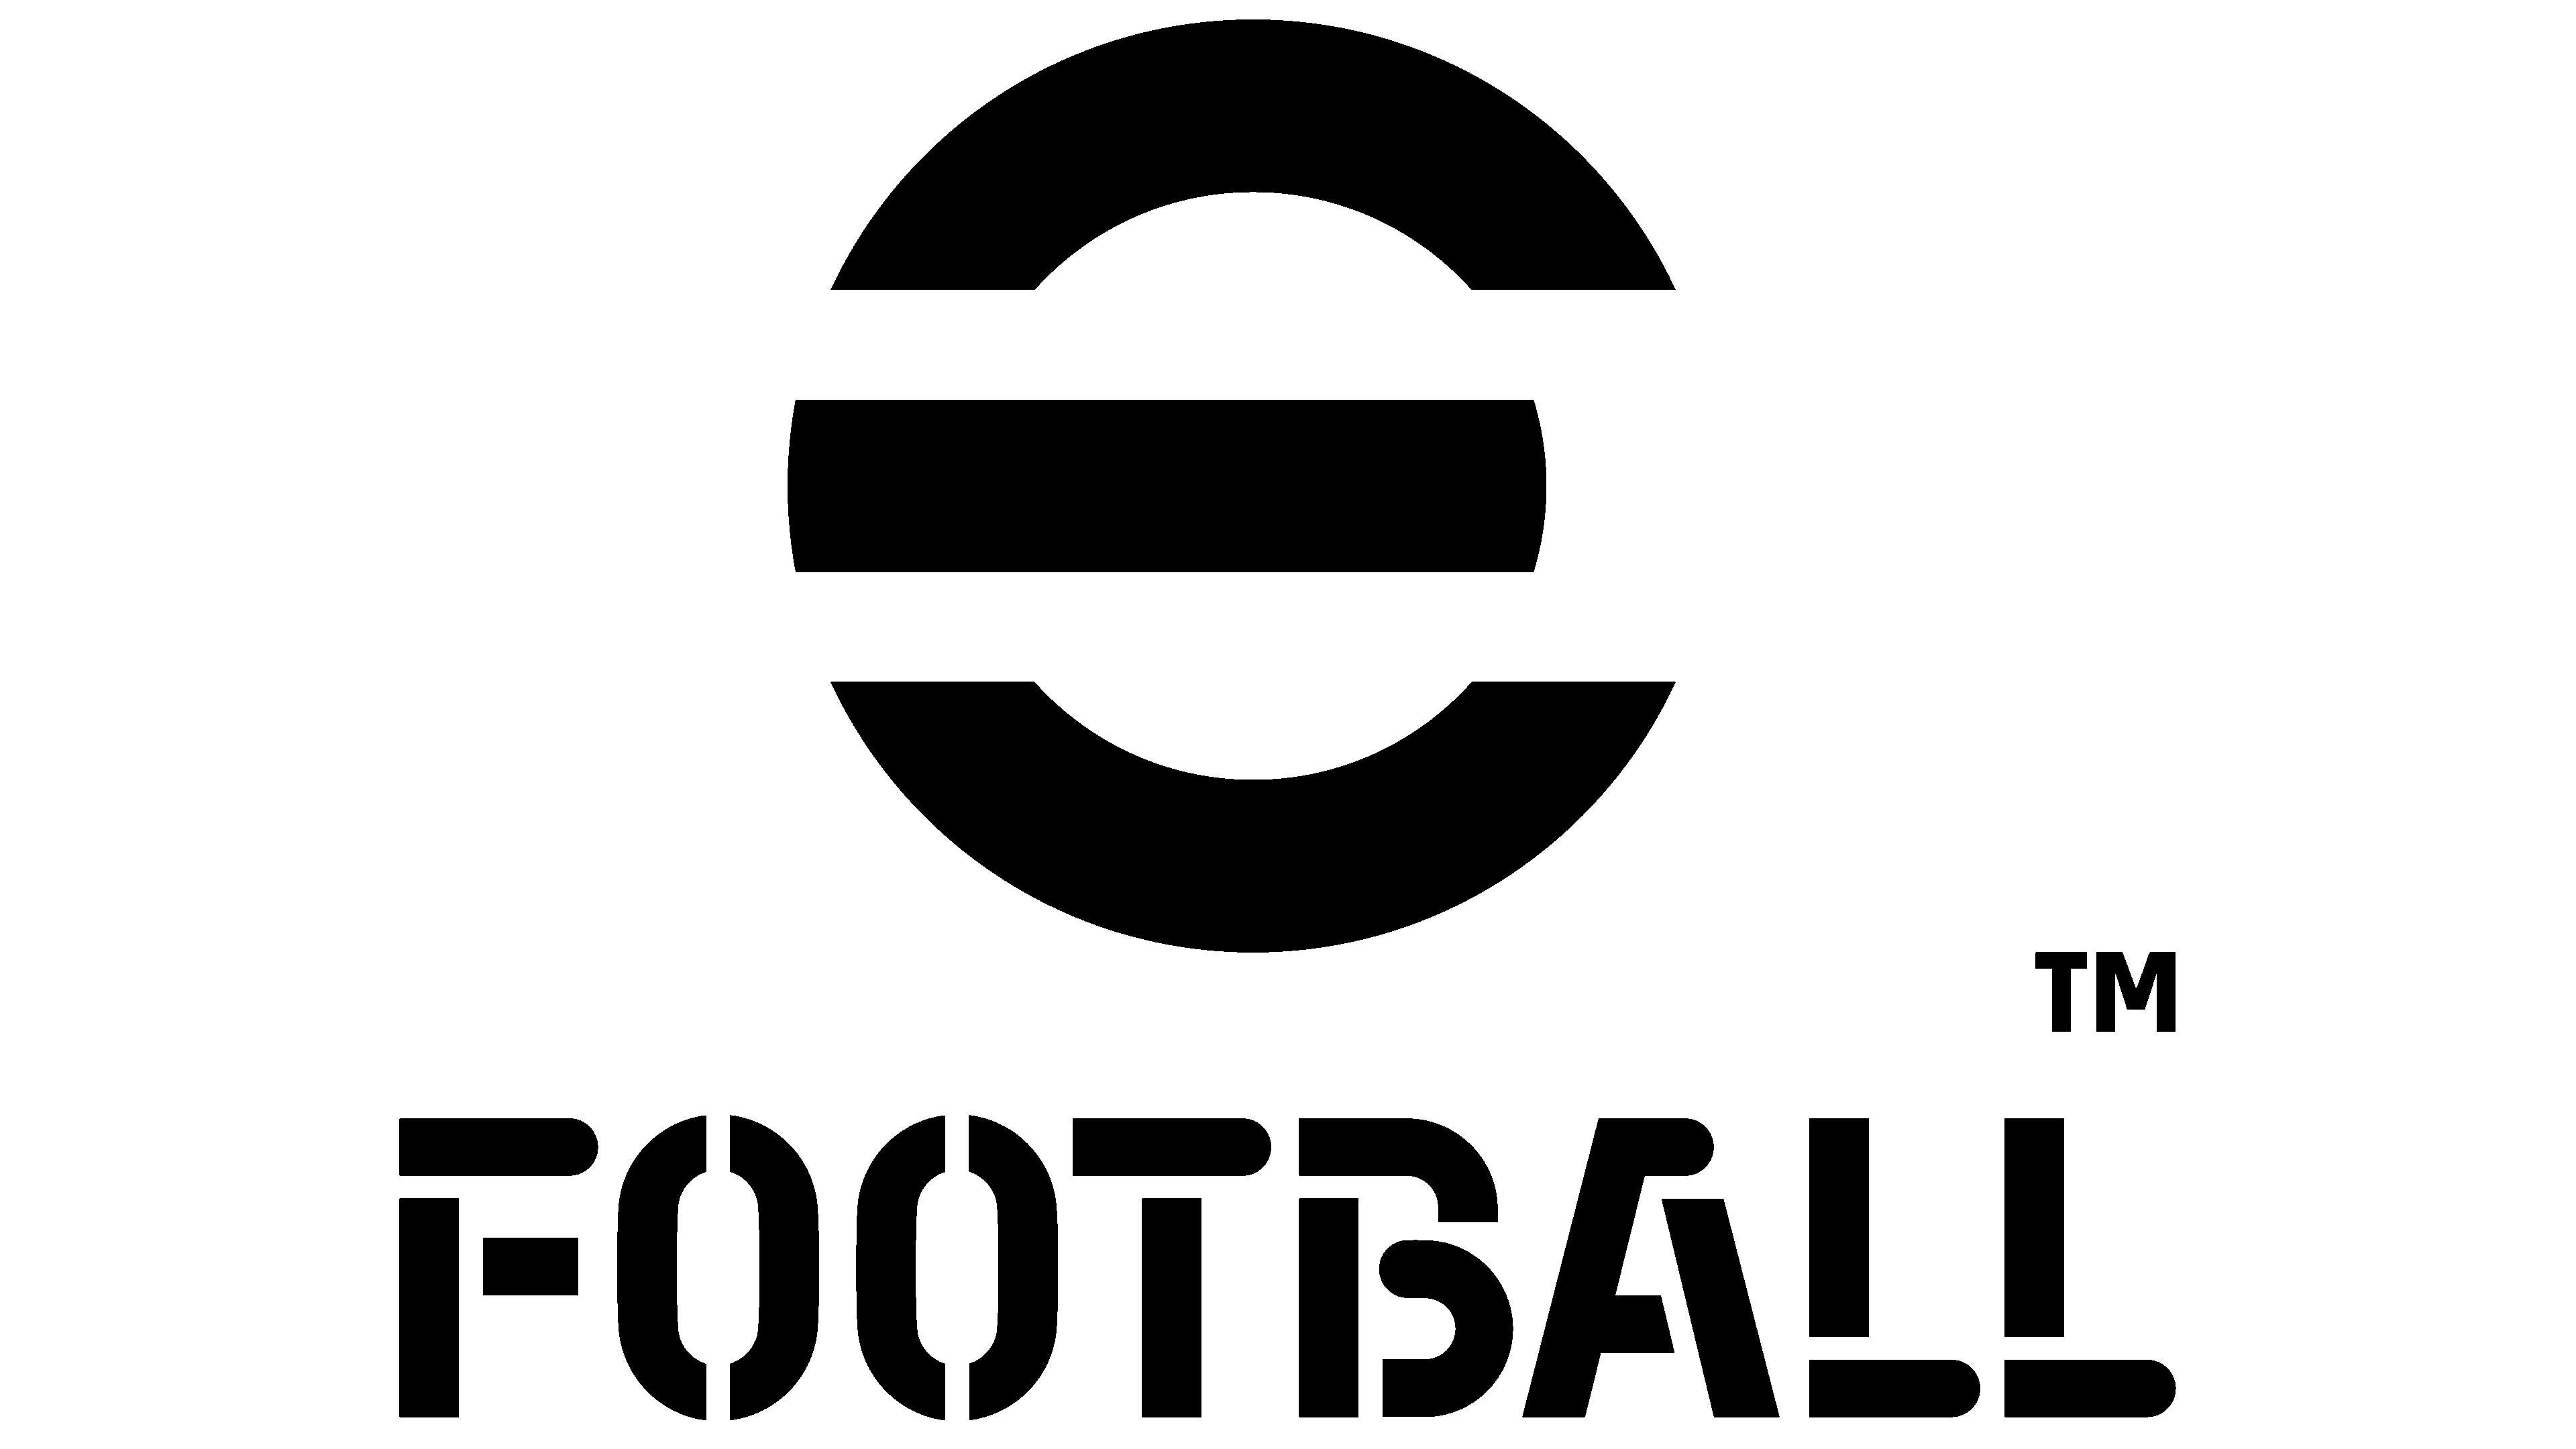 efootball 2022 mobile download